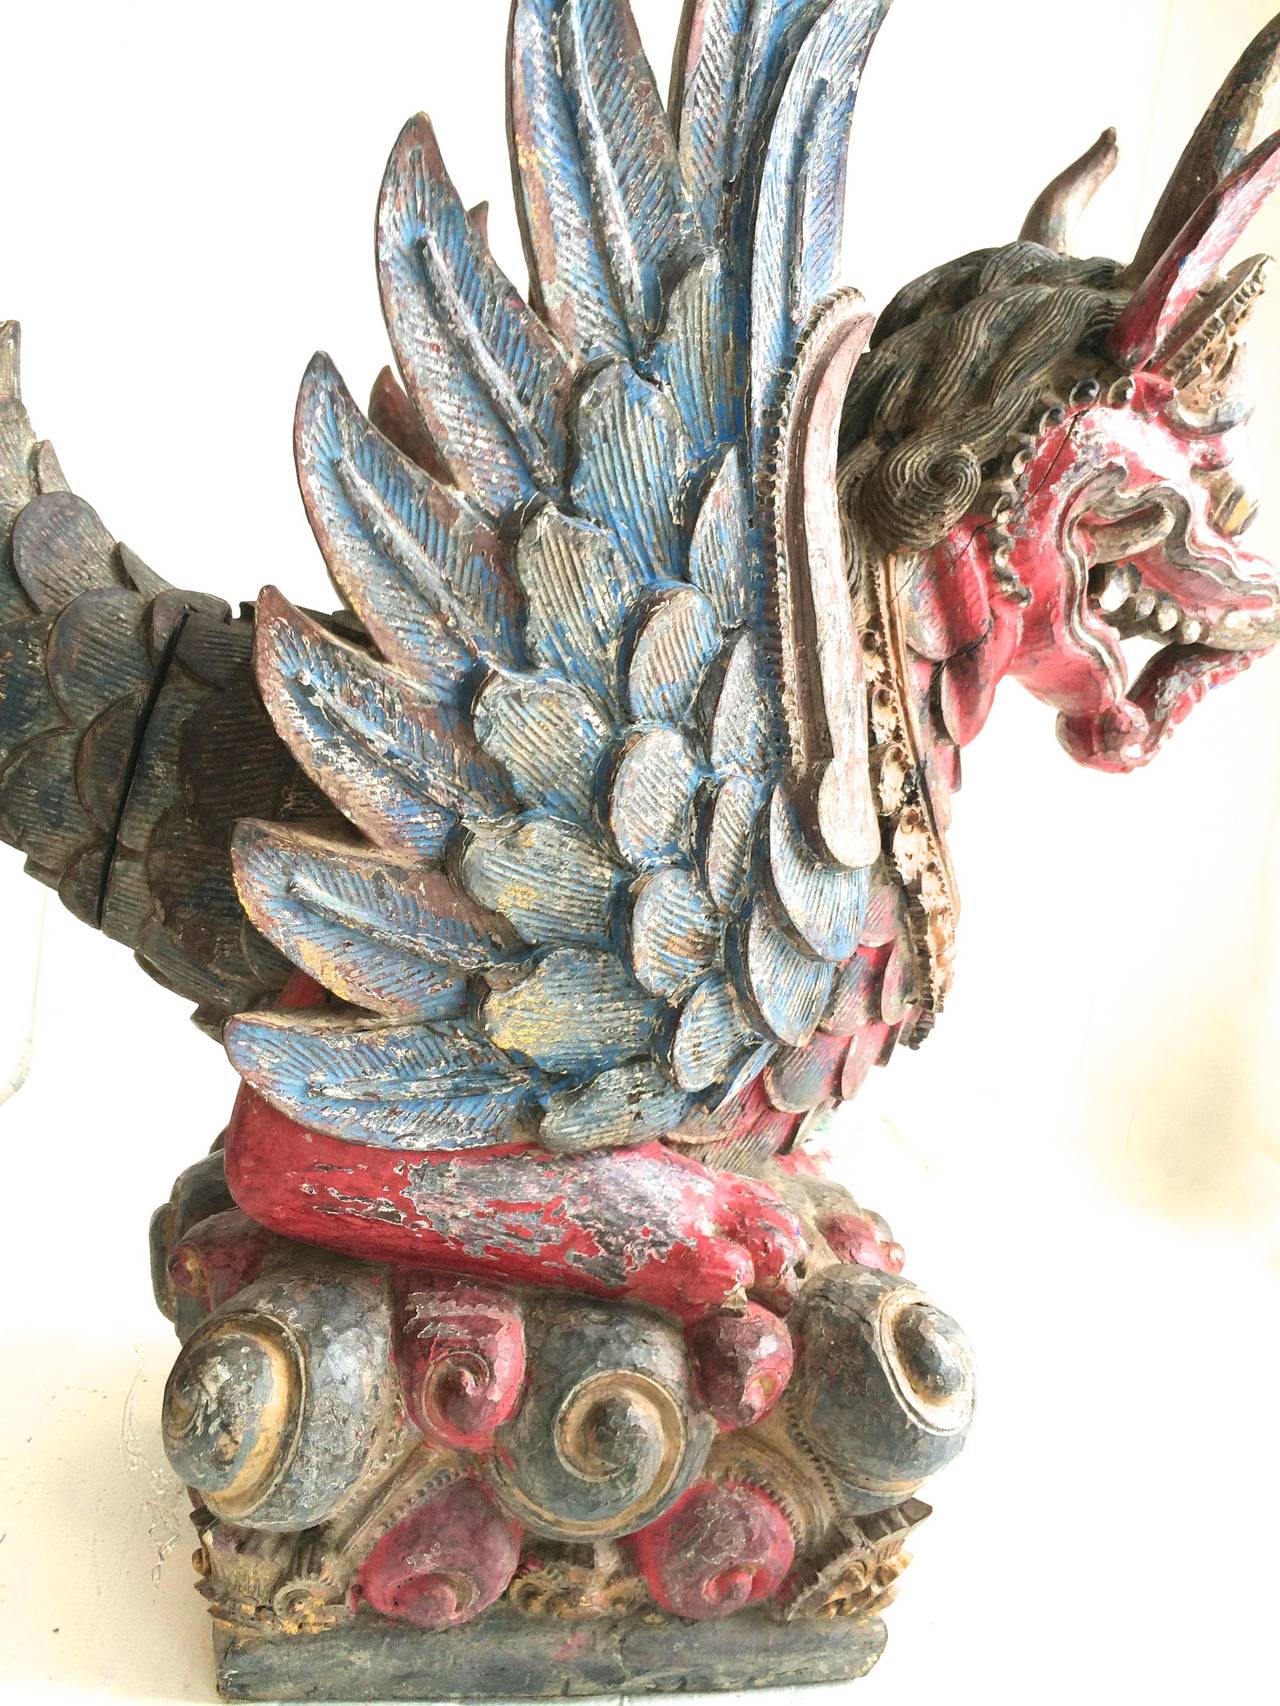 Winged Dragon Temple Offering Statue Bali - Brown Figurative Sculpture by Unknown